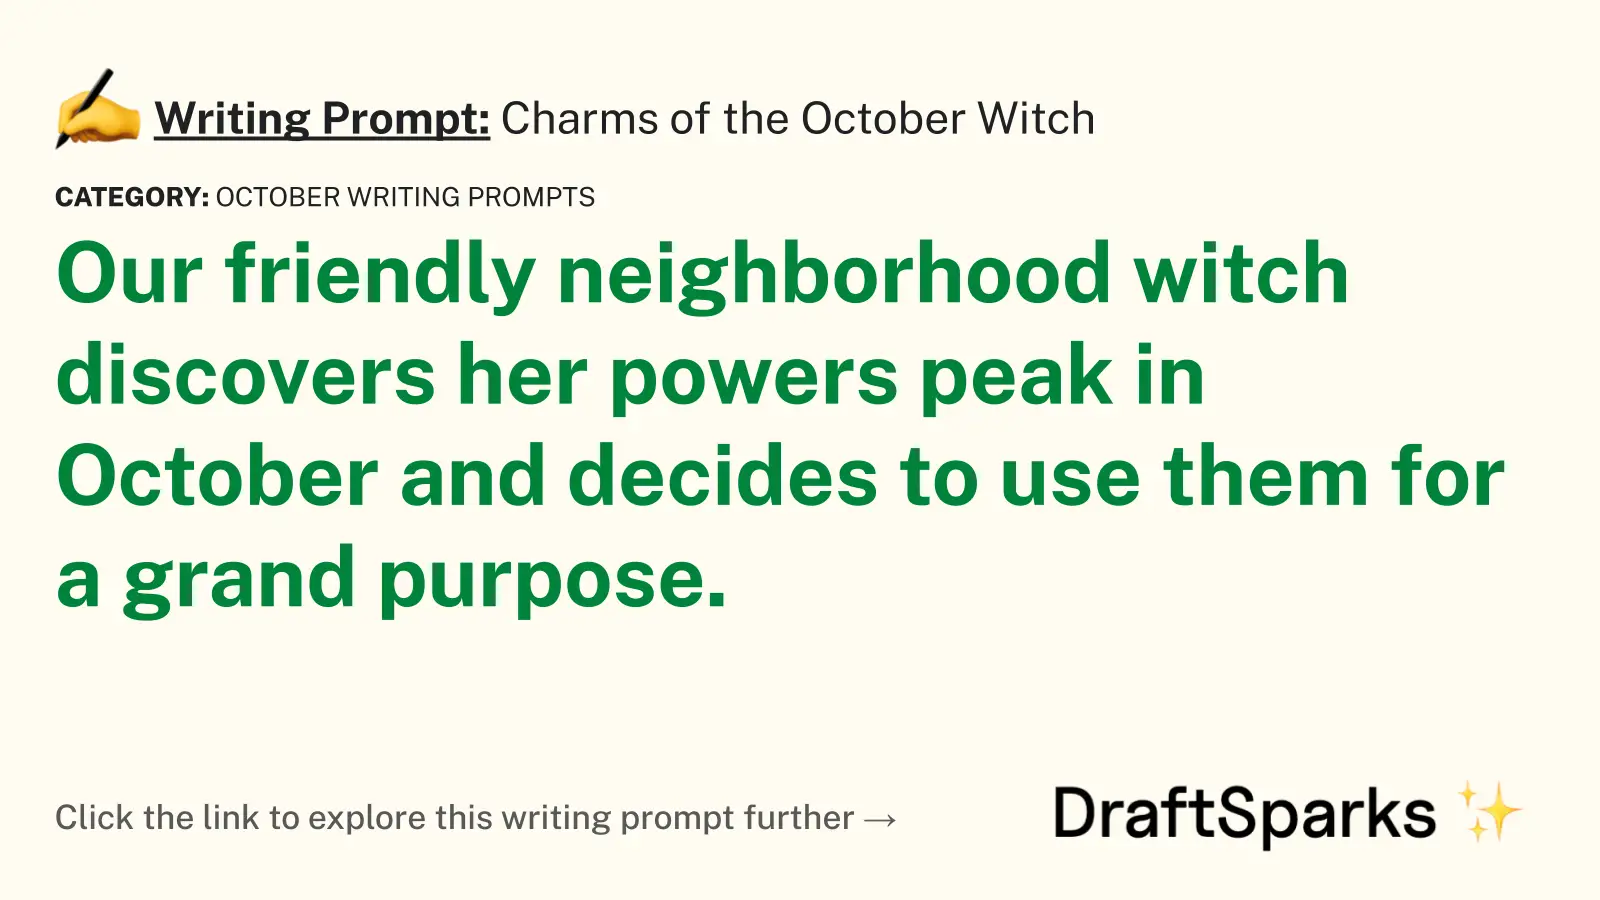 Charms of the October Witch